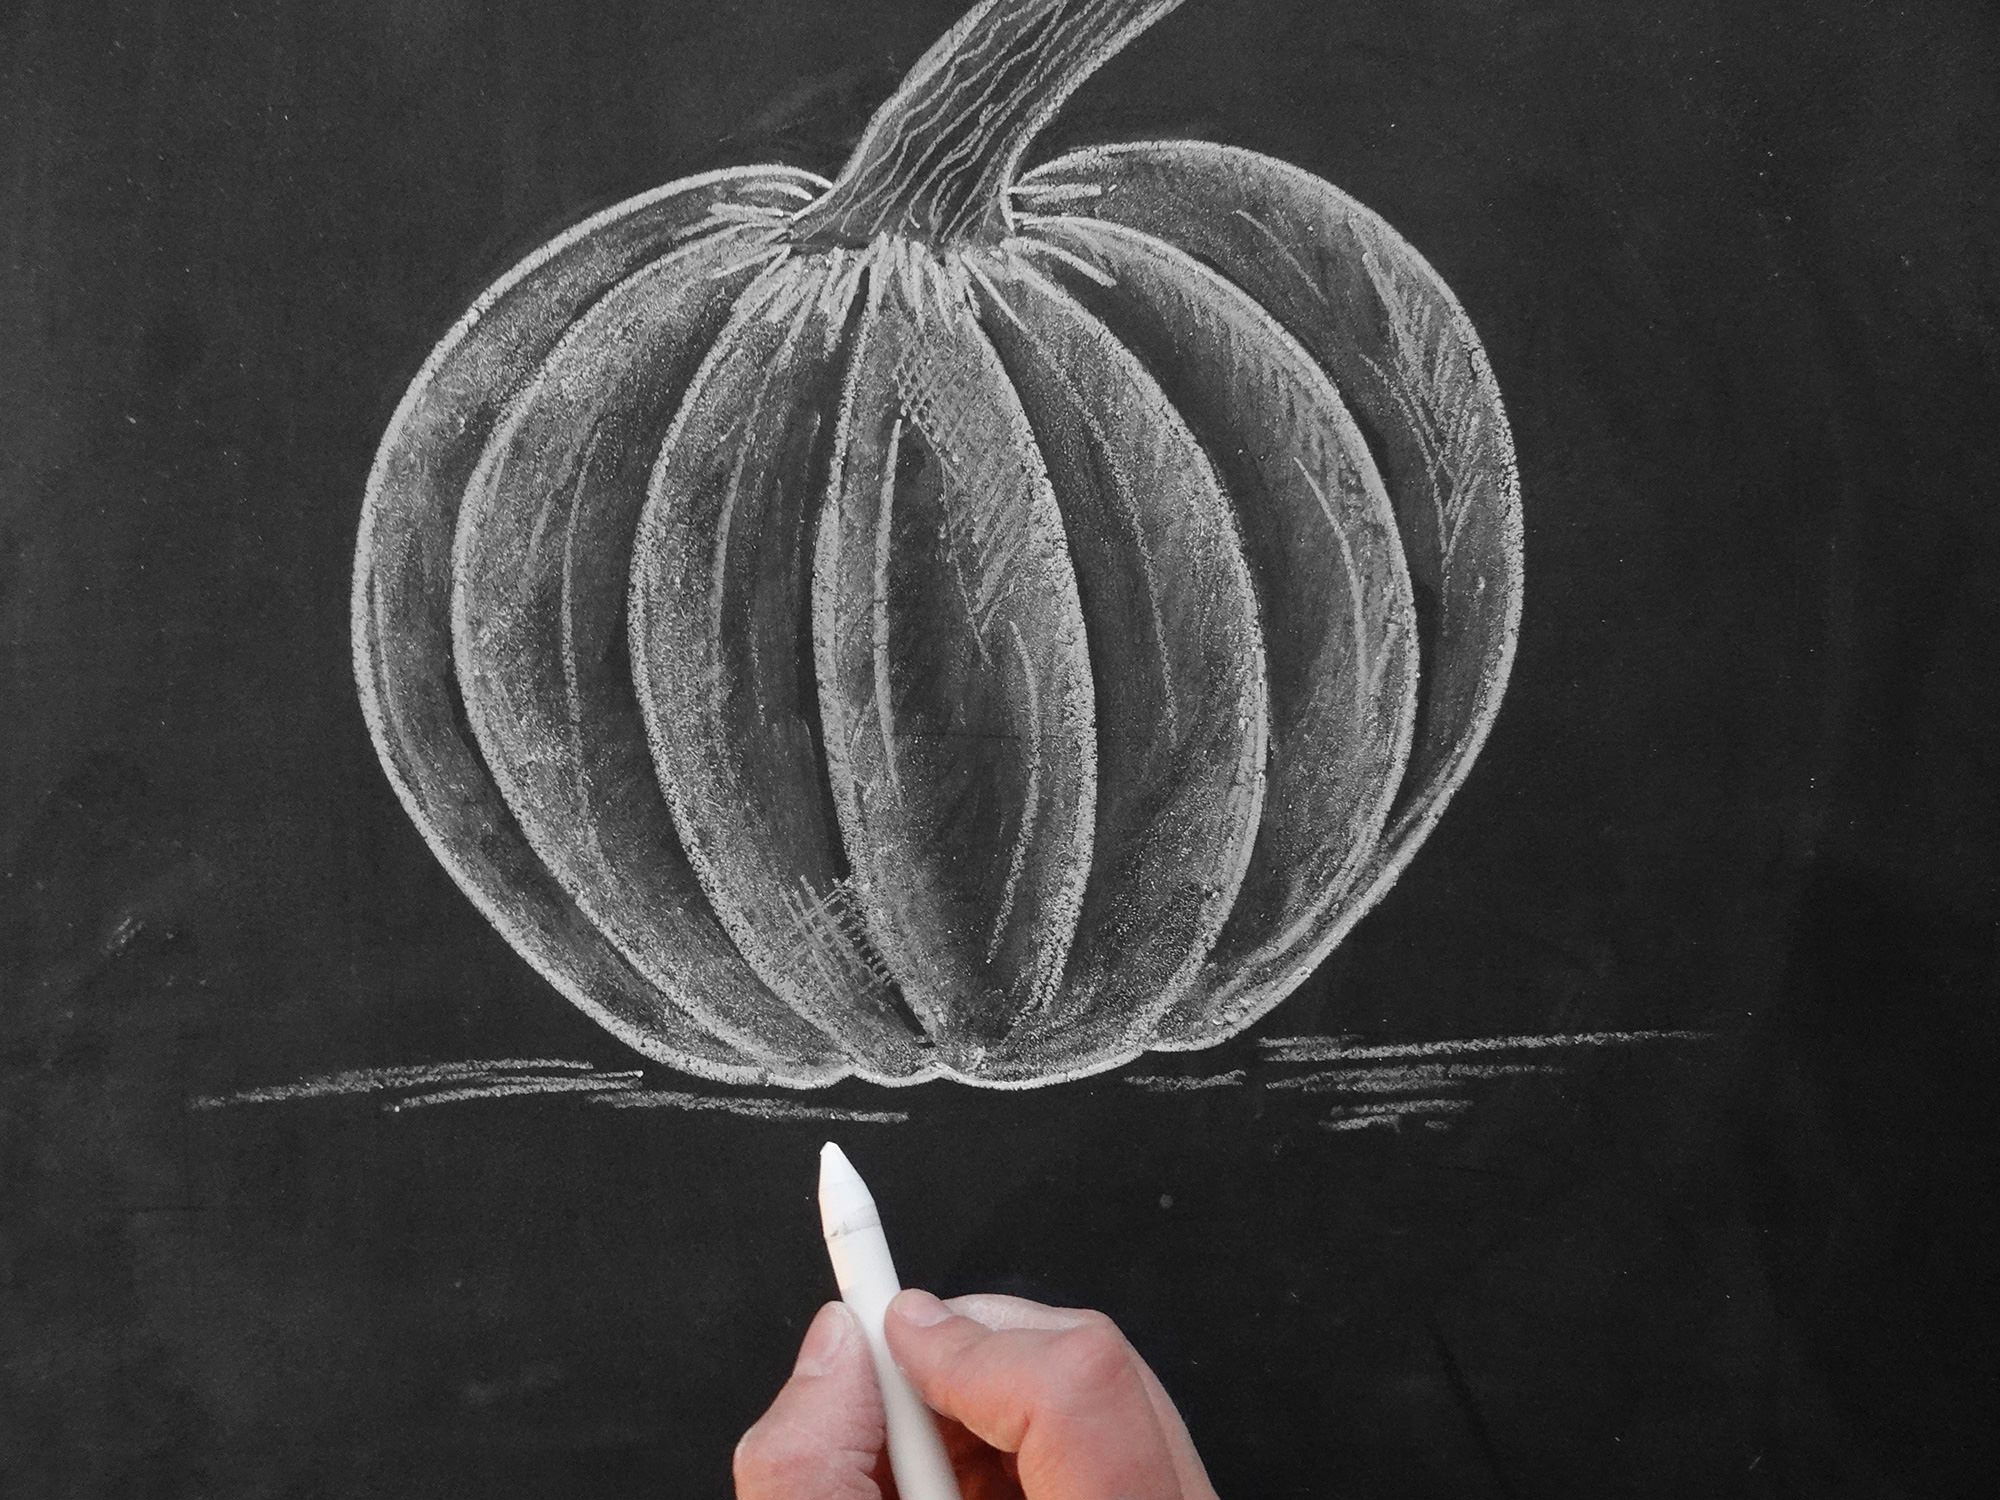 Valerie McKeehan, author of The Complete Book of Chalk Lettering, gives a step-by-step tutorial on how to draw a chalk pumpkin.